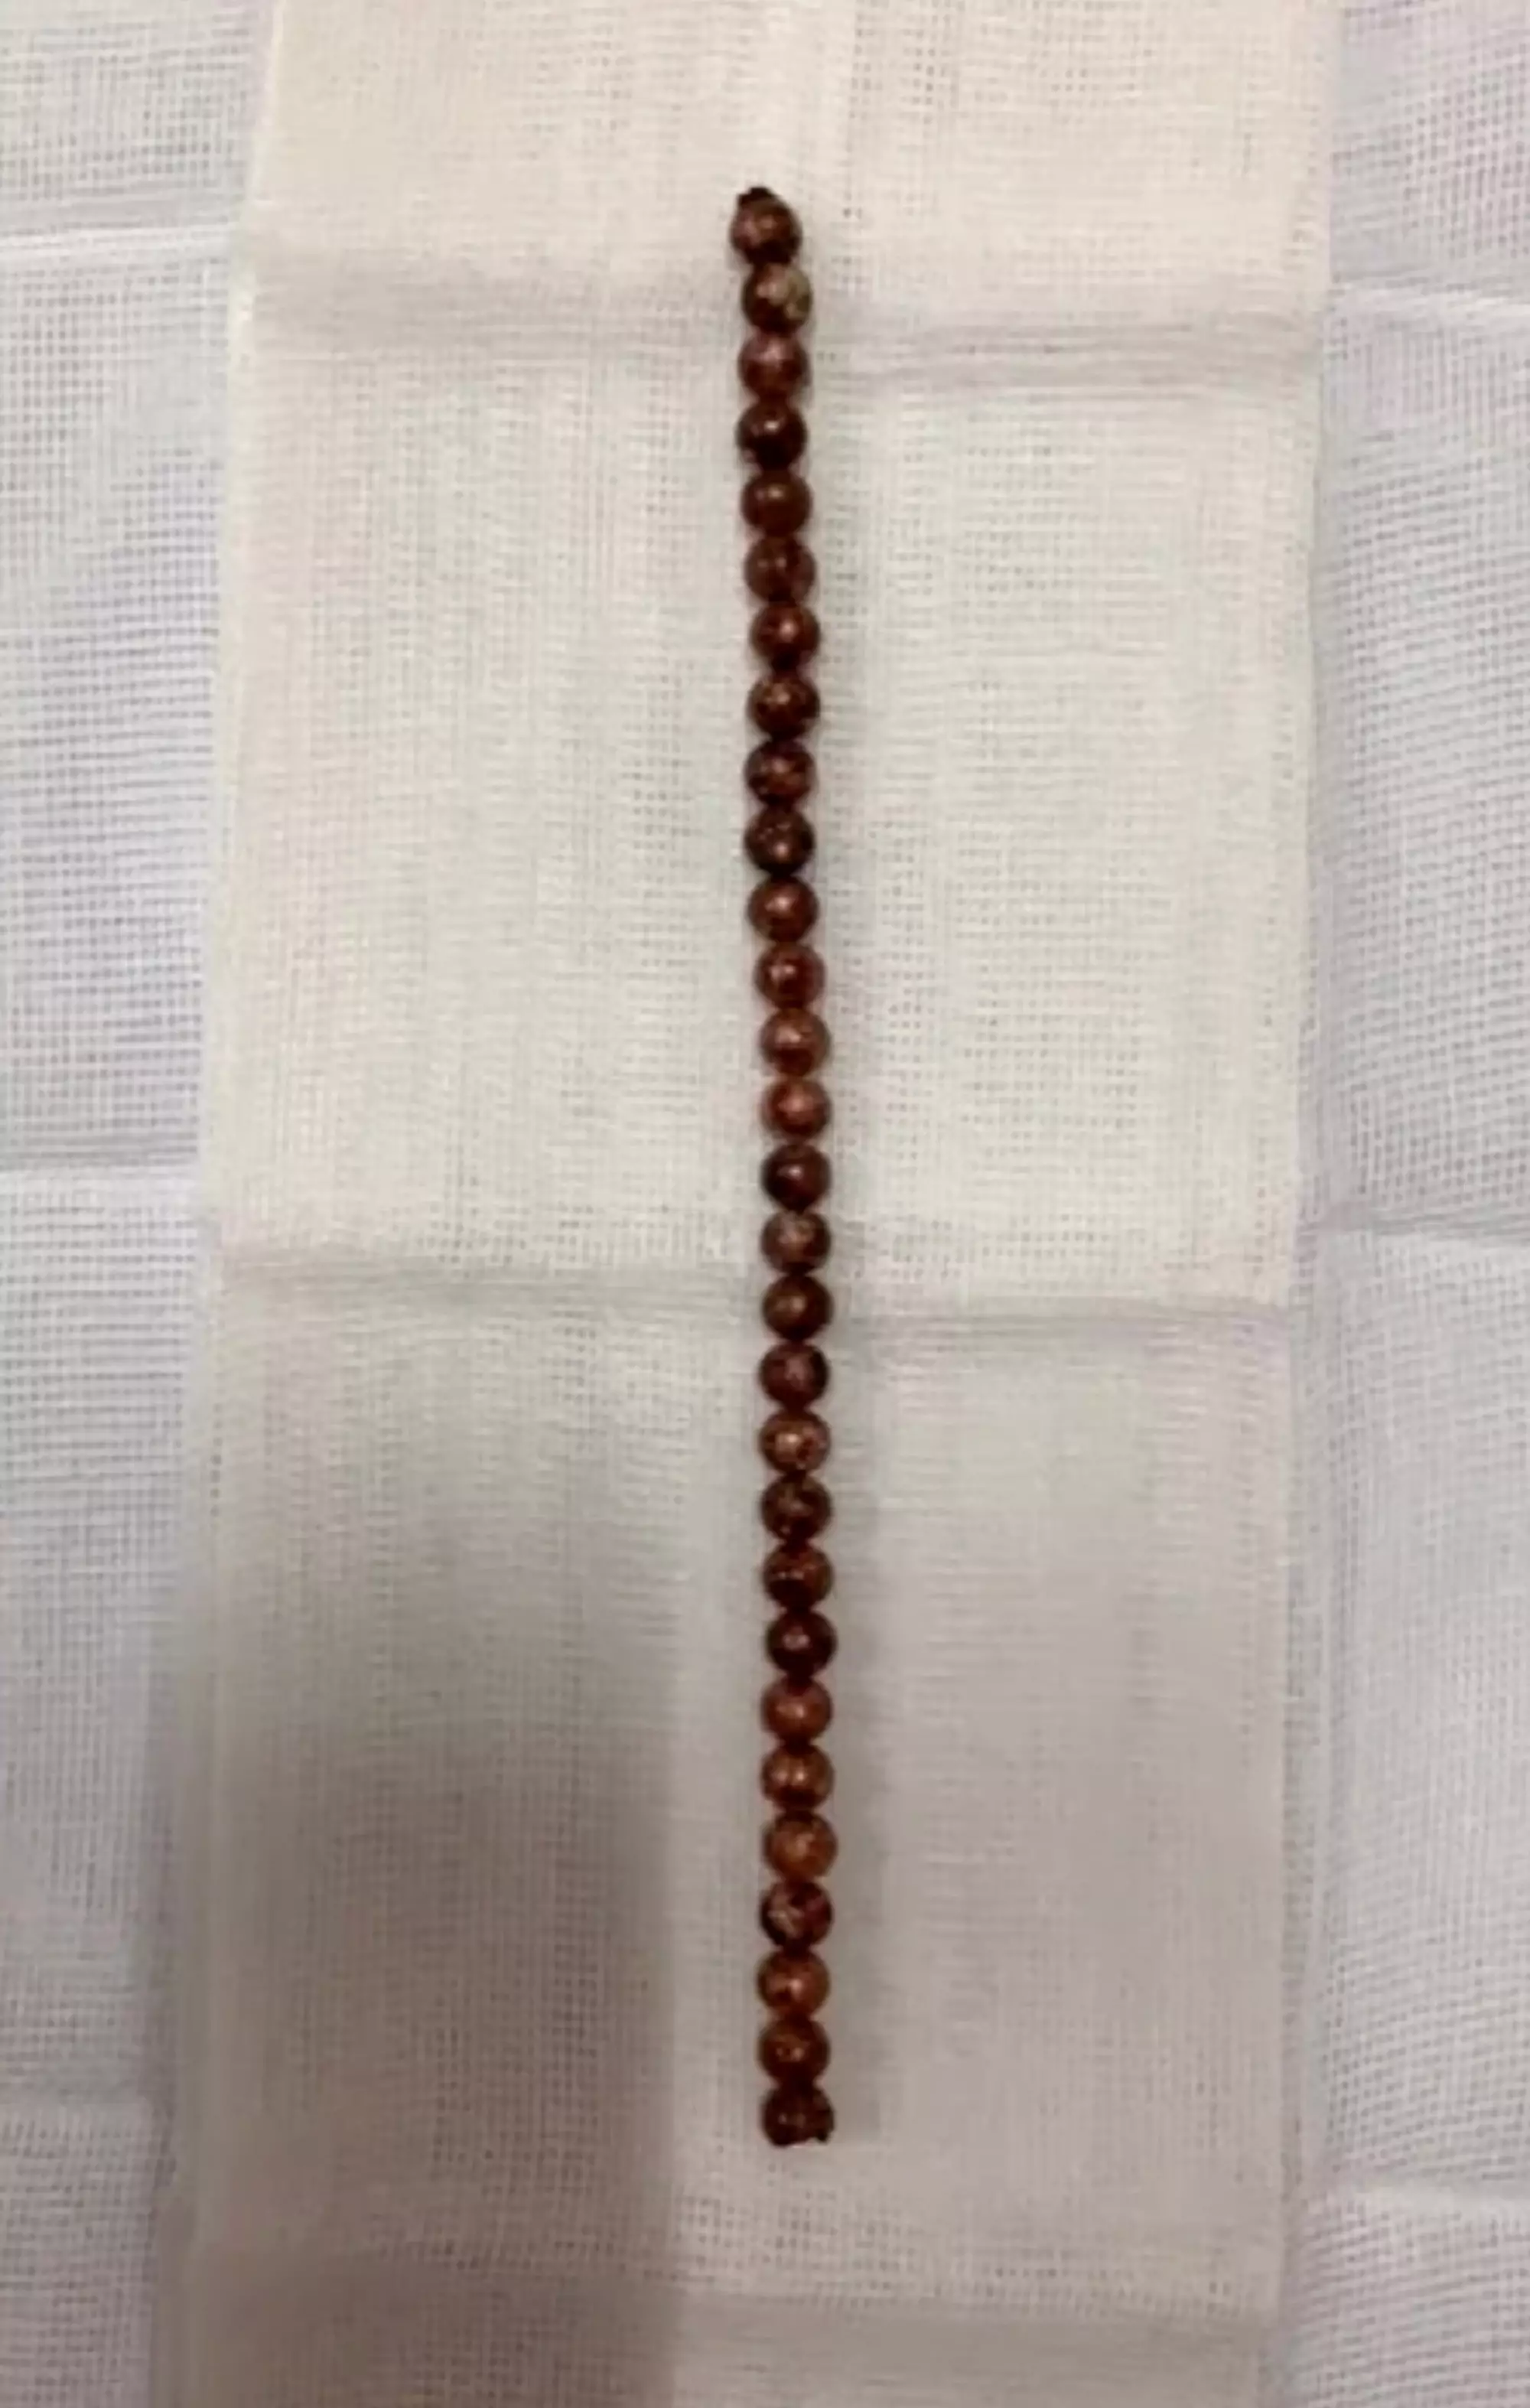 Doctors removed 29 magnetic balls from the young boy's bladder.